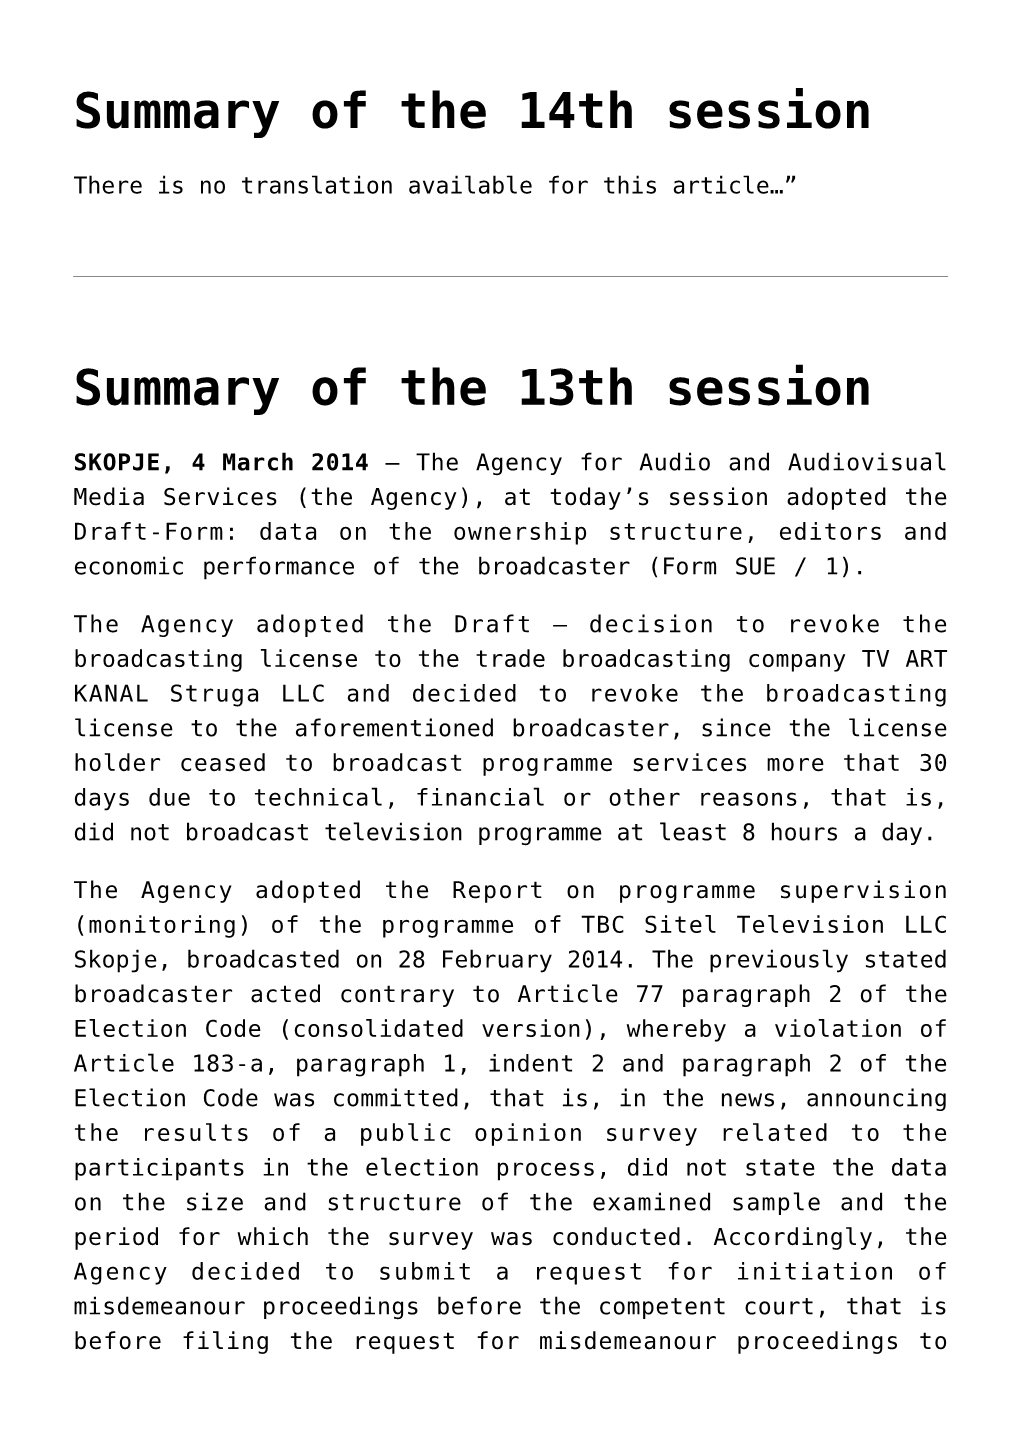 Summary of the 14Th Session,Summary of the 13Th